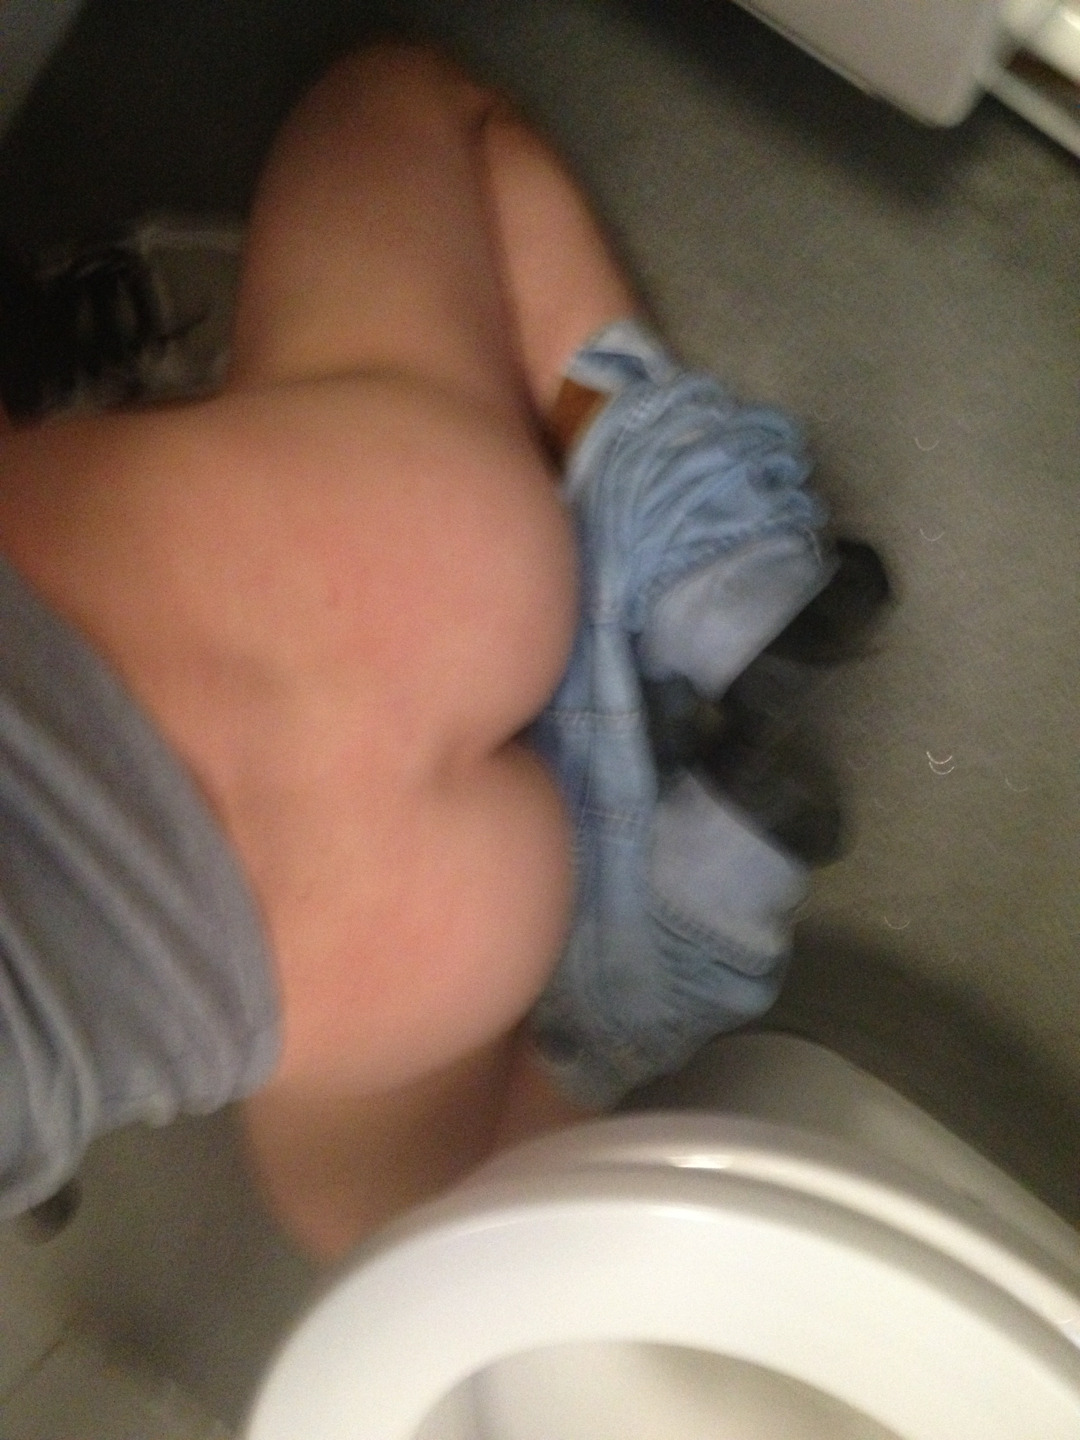 anton-dickson:  And a horny busy lunch break fuck in the office toilets lol… Nice